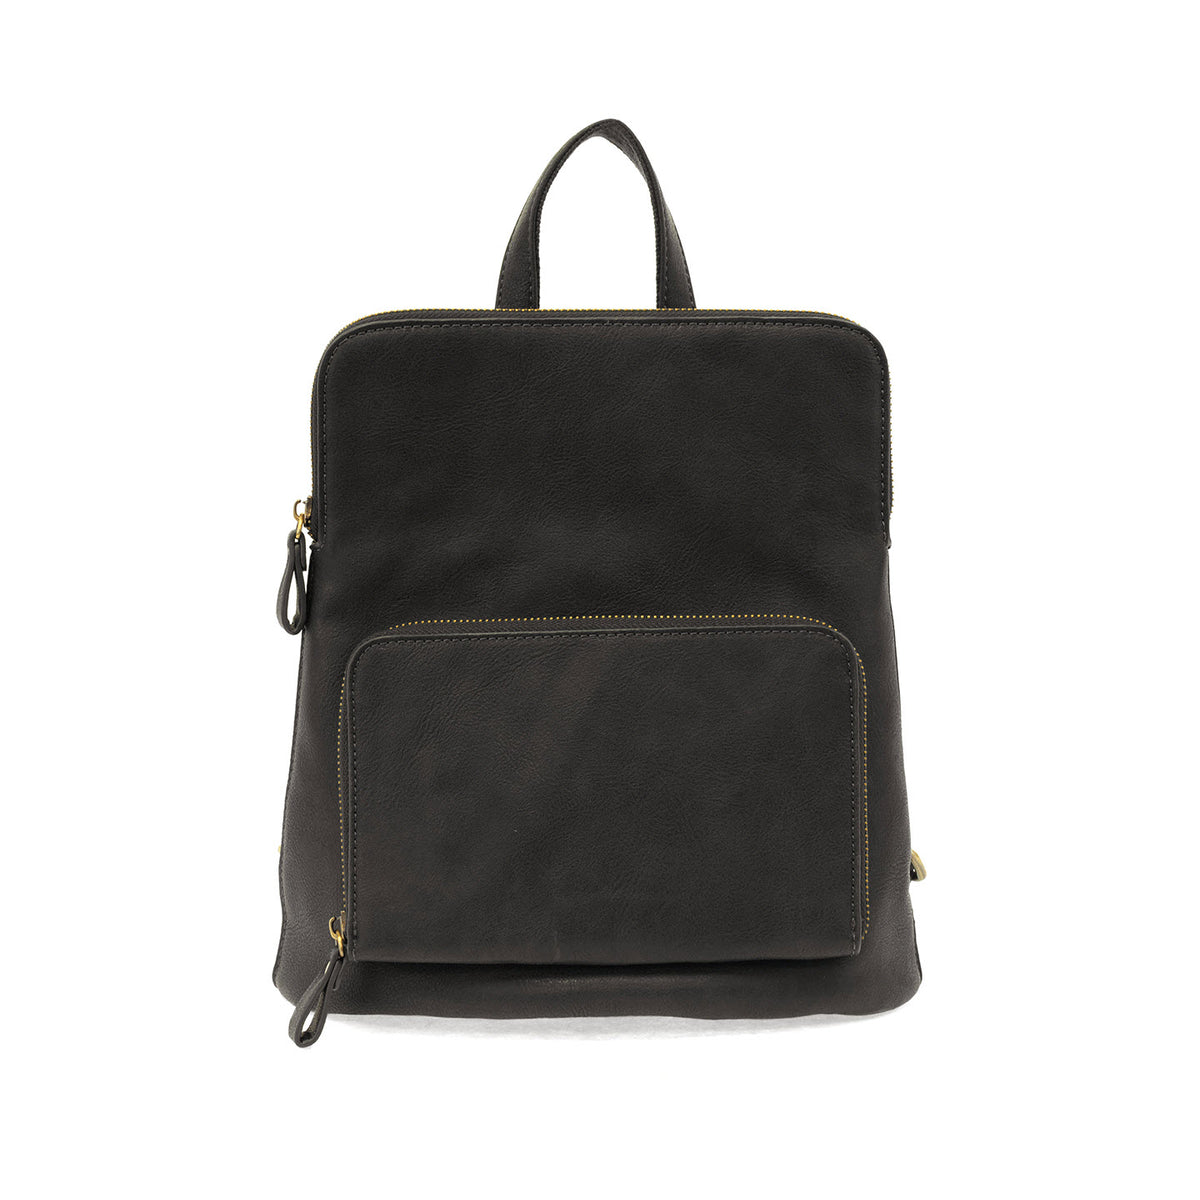 Joy Susan Julia Mini Backpack in Black faux leather with front zip pocket, isolated on a white background.